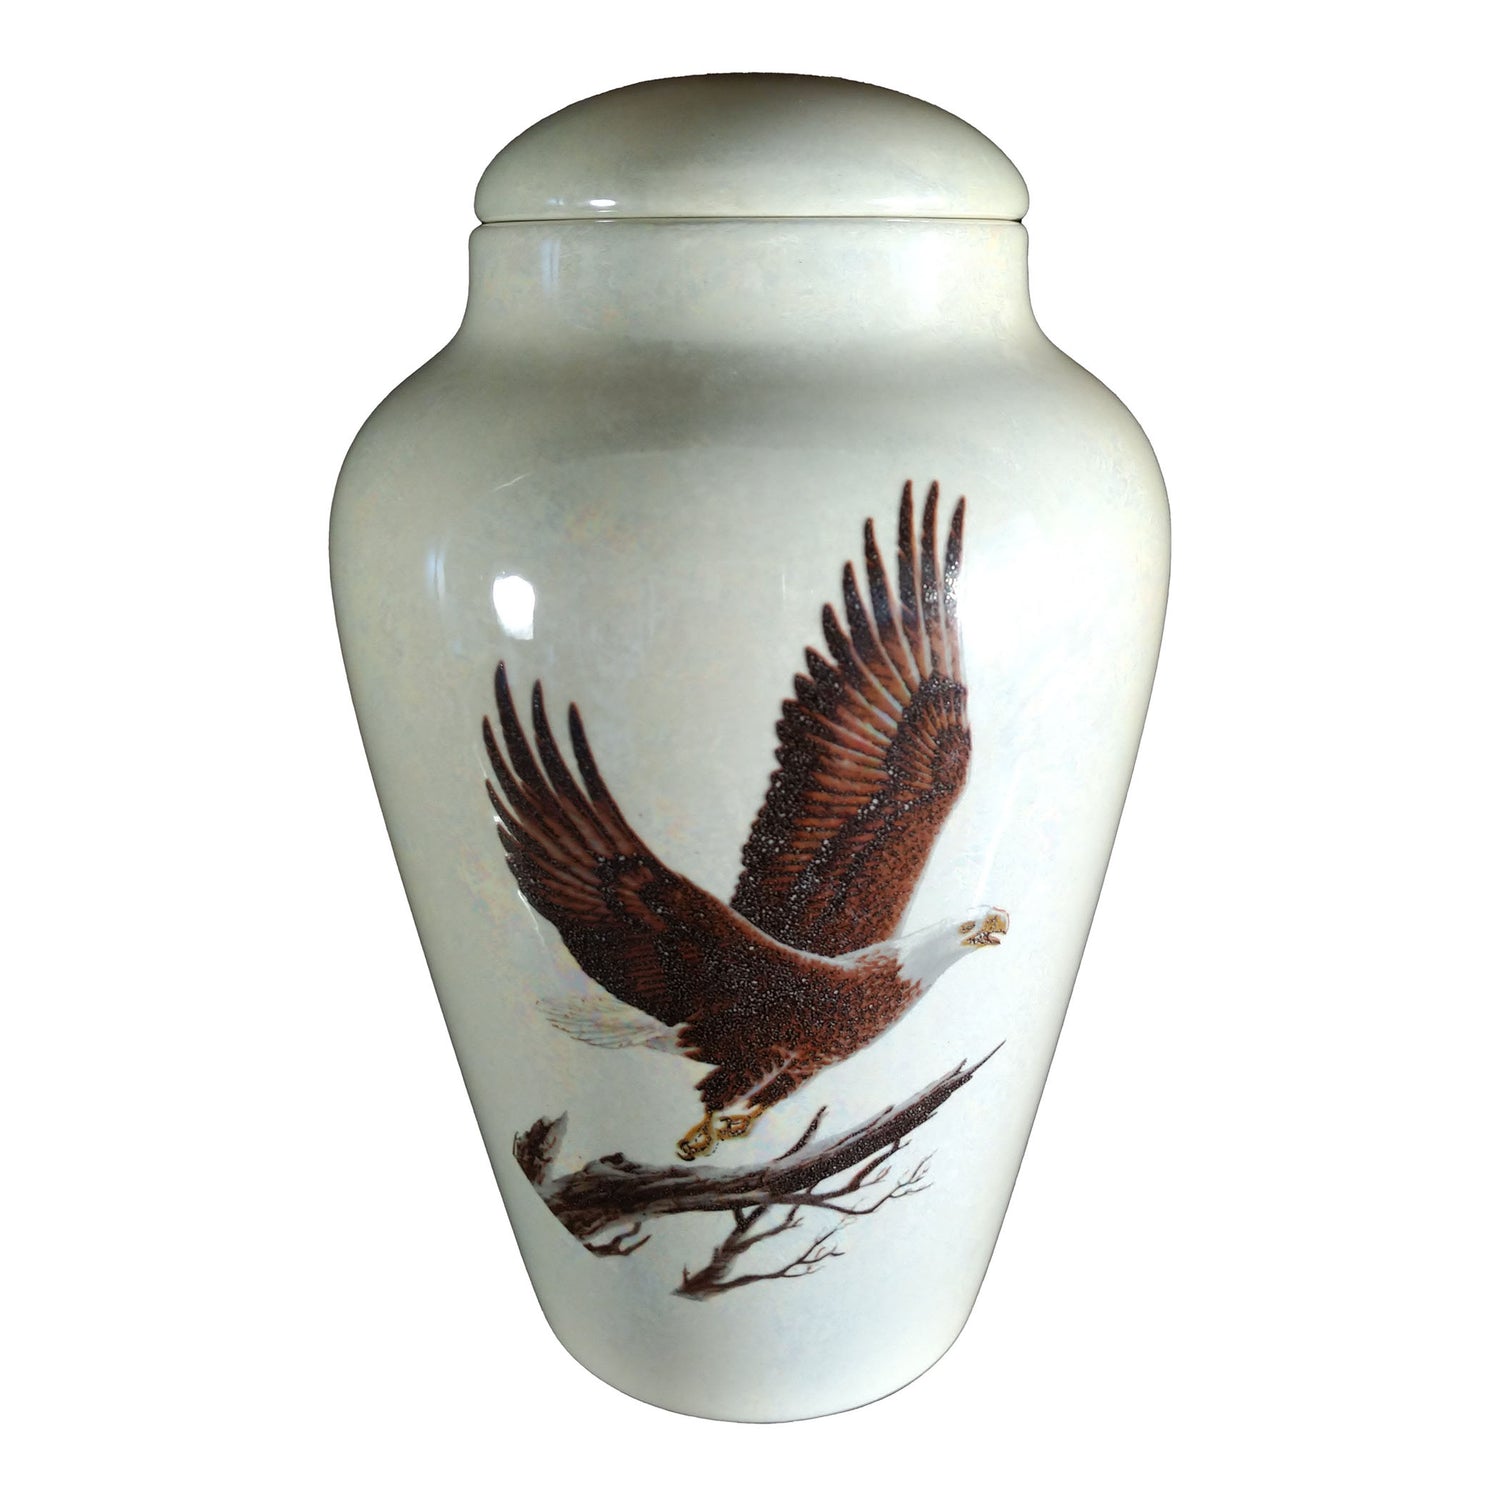 A beautiful medium sized cremation ceramic urn with a decoration of a bald eagle taking flight from a tree limb with a mother-of-pearl finish.